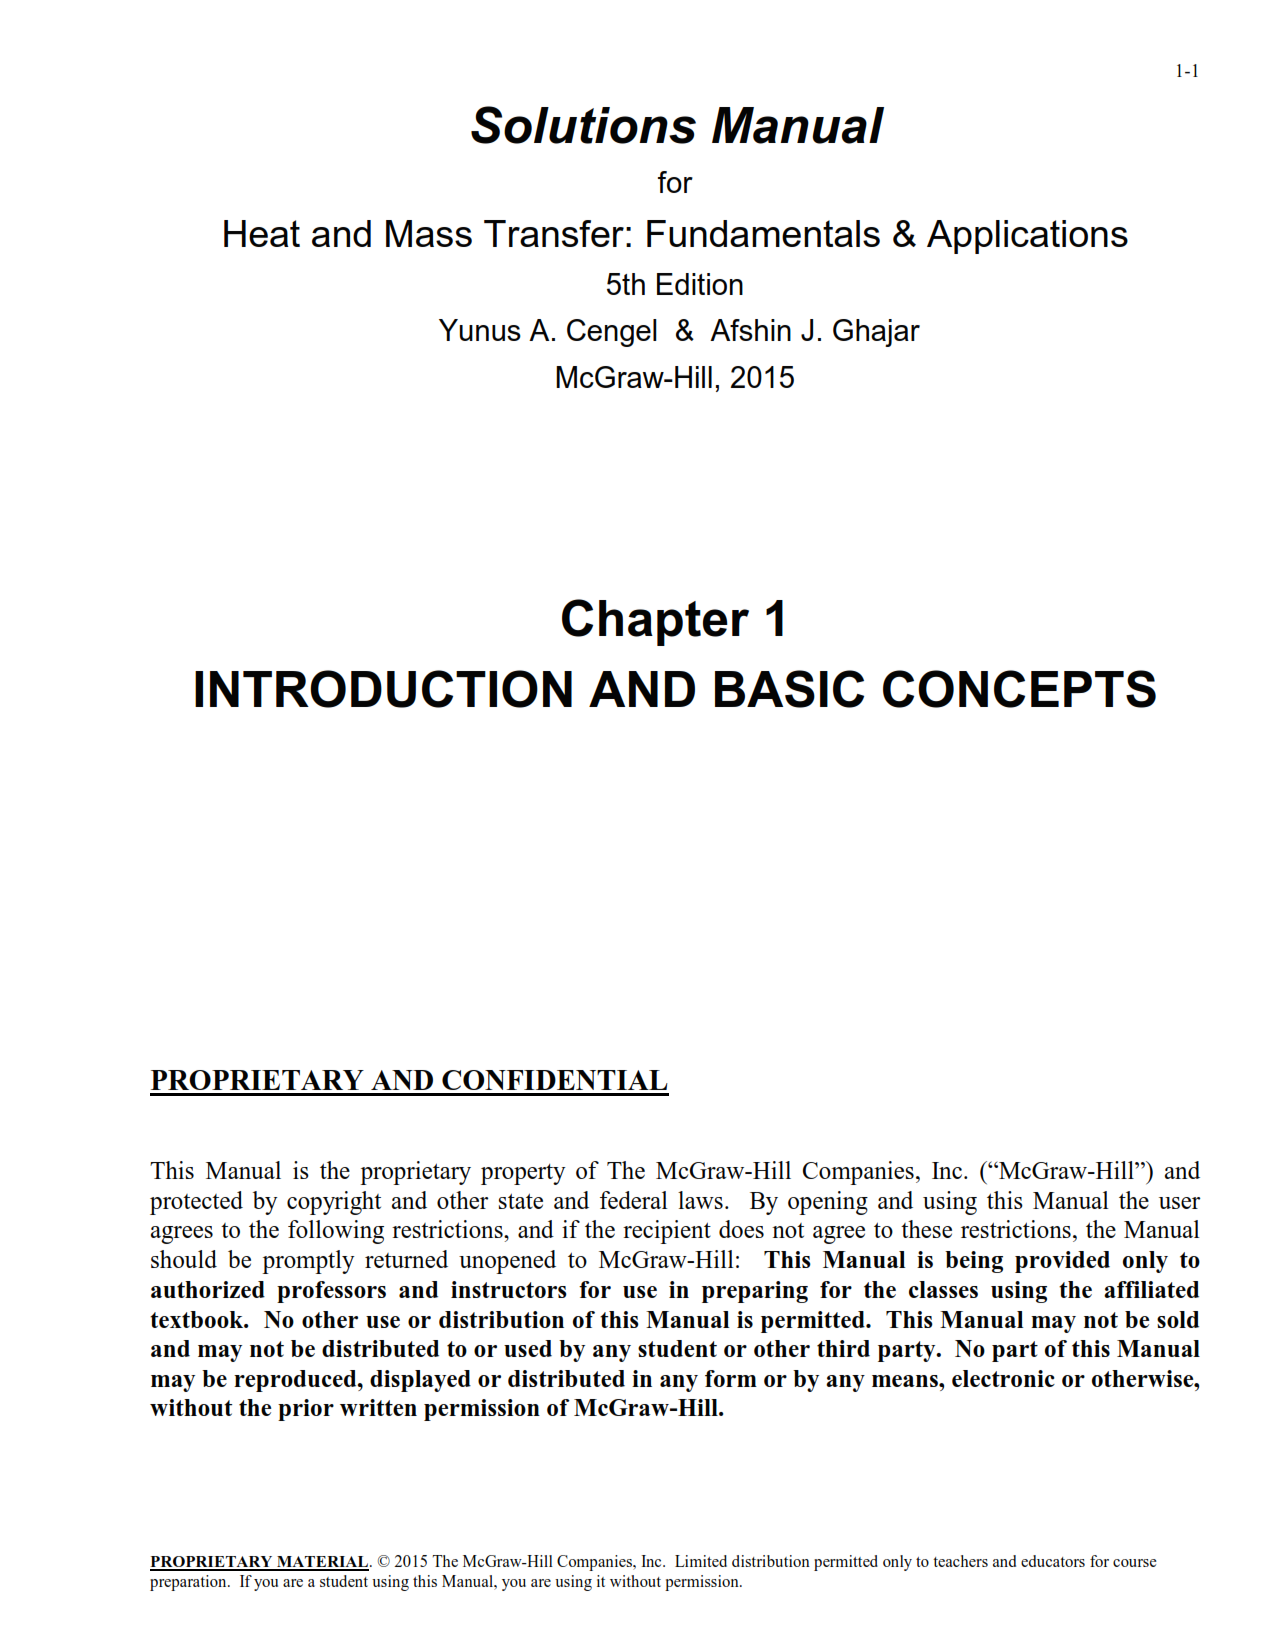 download free Heat and mass transfer fundamentals and applications 5th edition solution manual written by Cengel eBook pdf